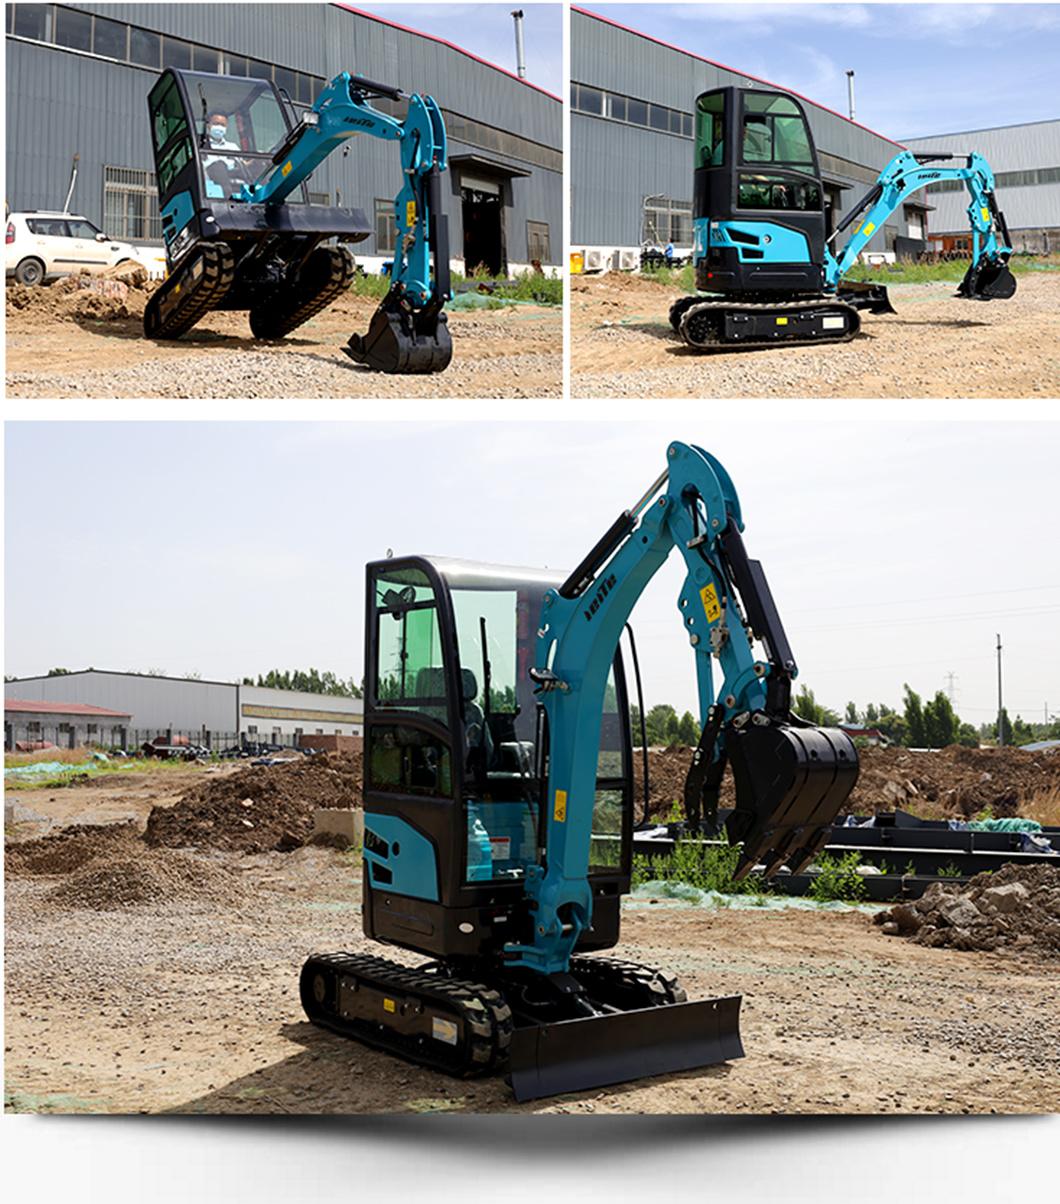 Small Digger Agricultural Excavator Small Orchard Excavator 2.0ton Hydraulic Crawler Mini Excavator